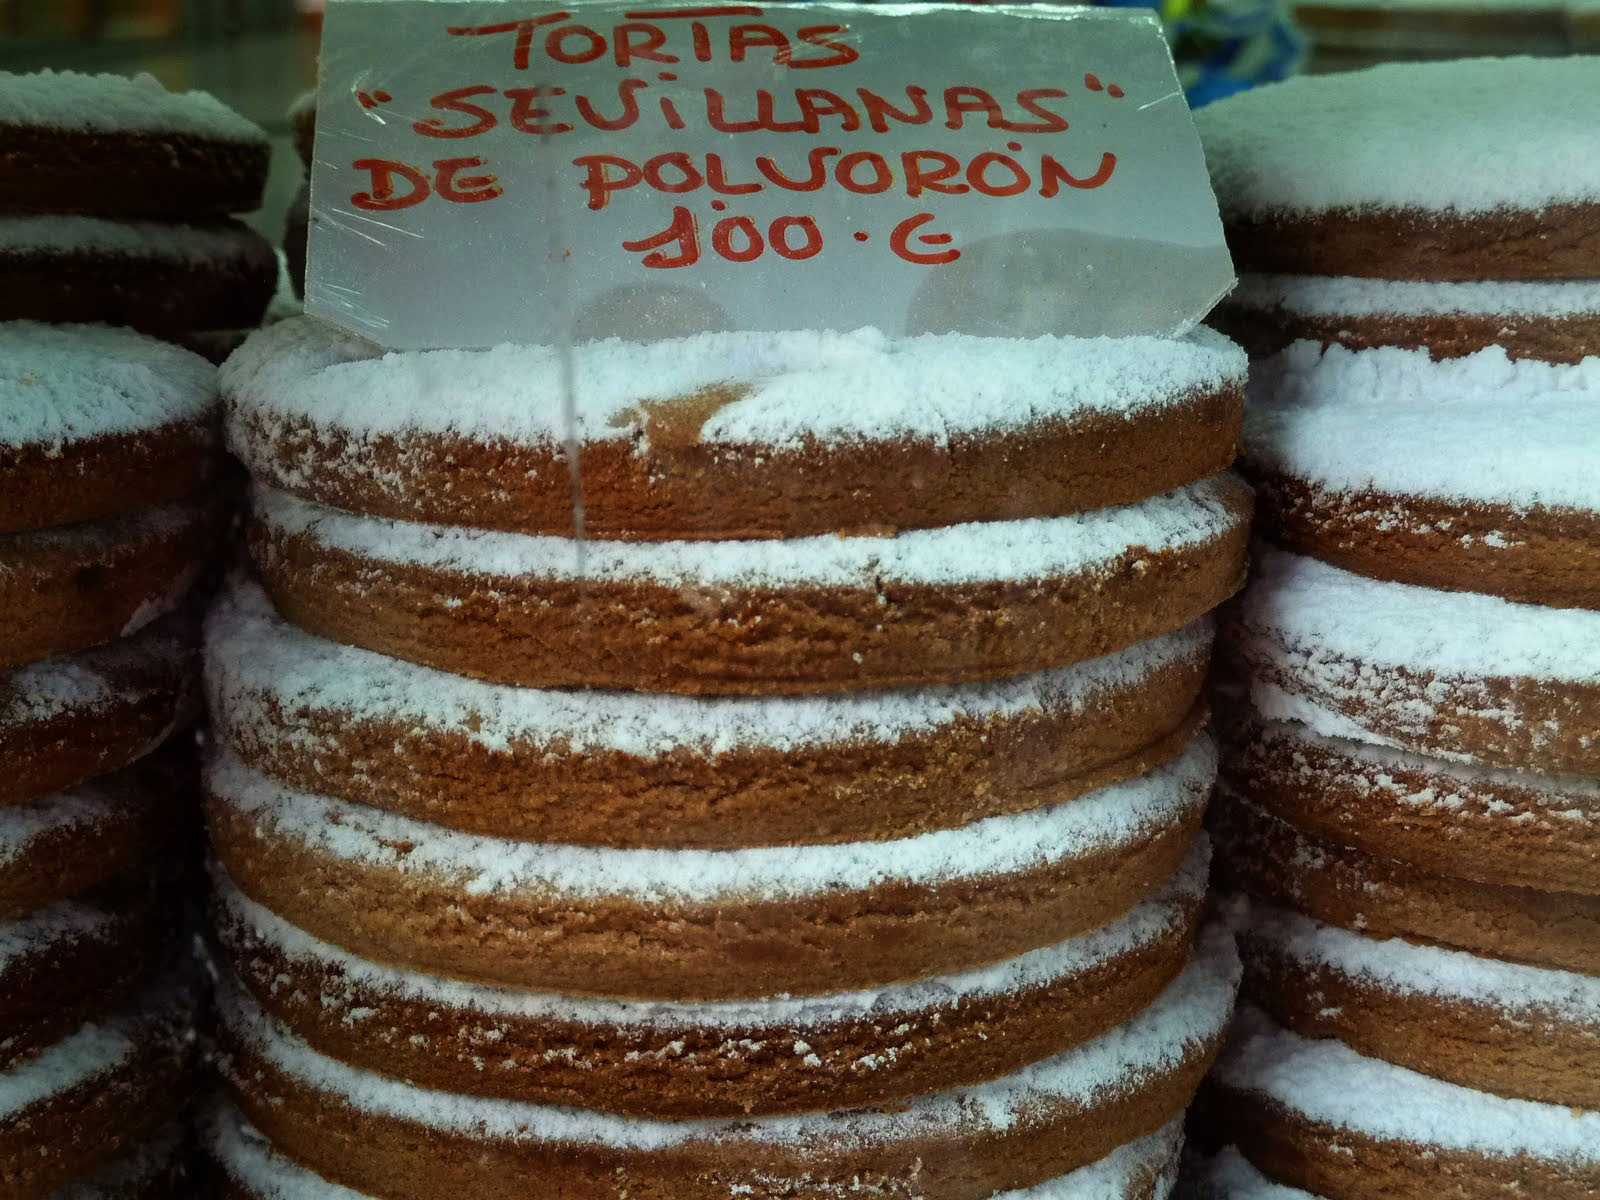 Convent Sweets in Spain and Portugal - Sevilla's Cookies